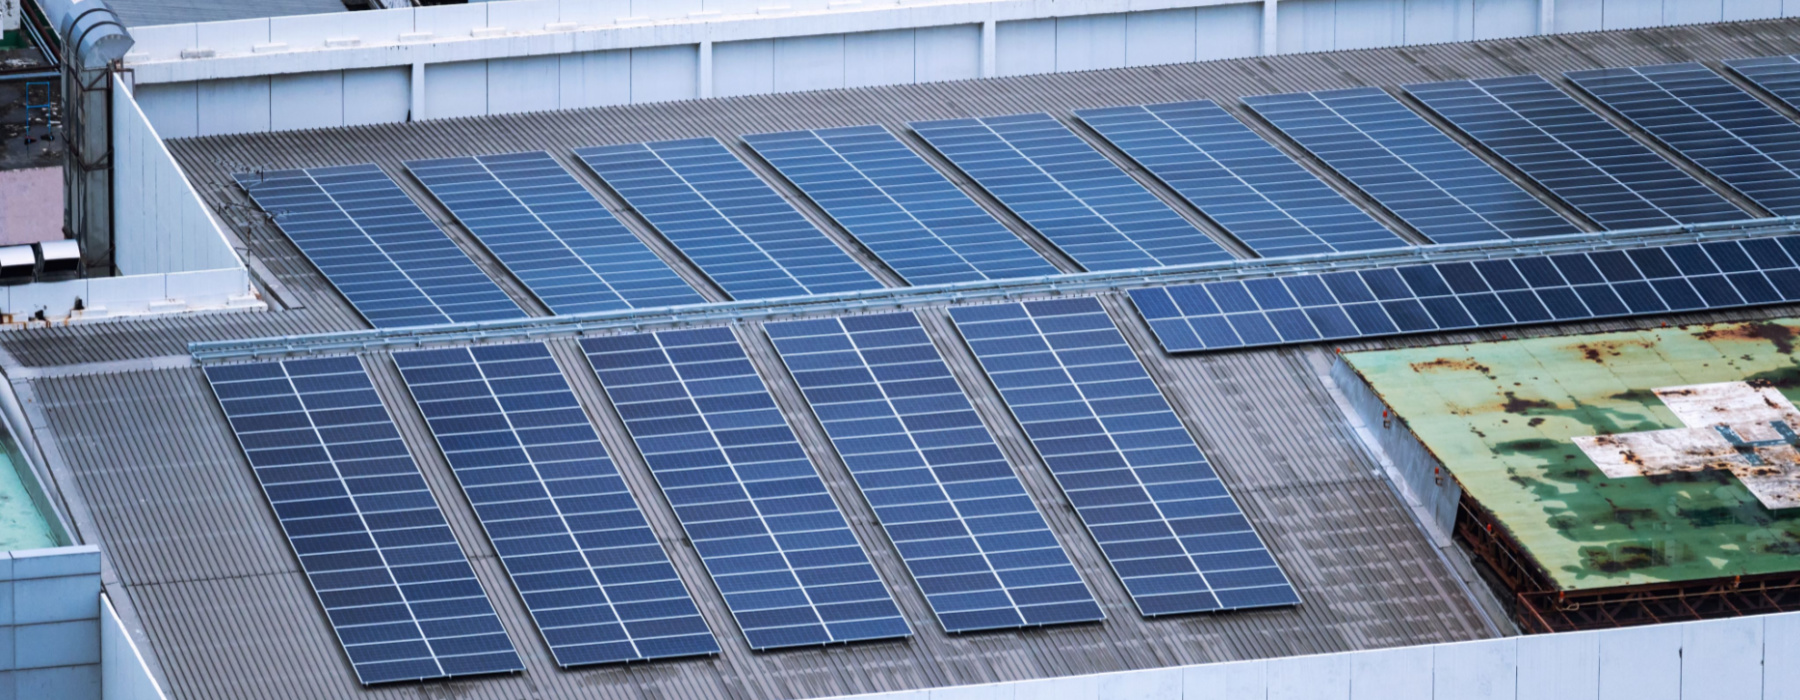 4 Tips to Get Better Results with Commercial Solar Power